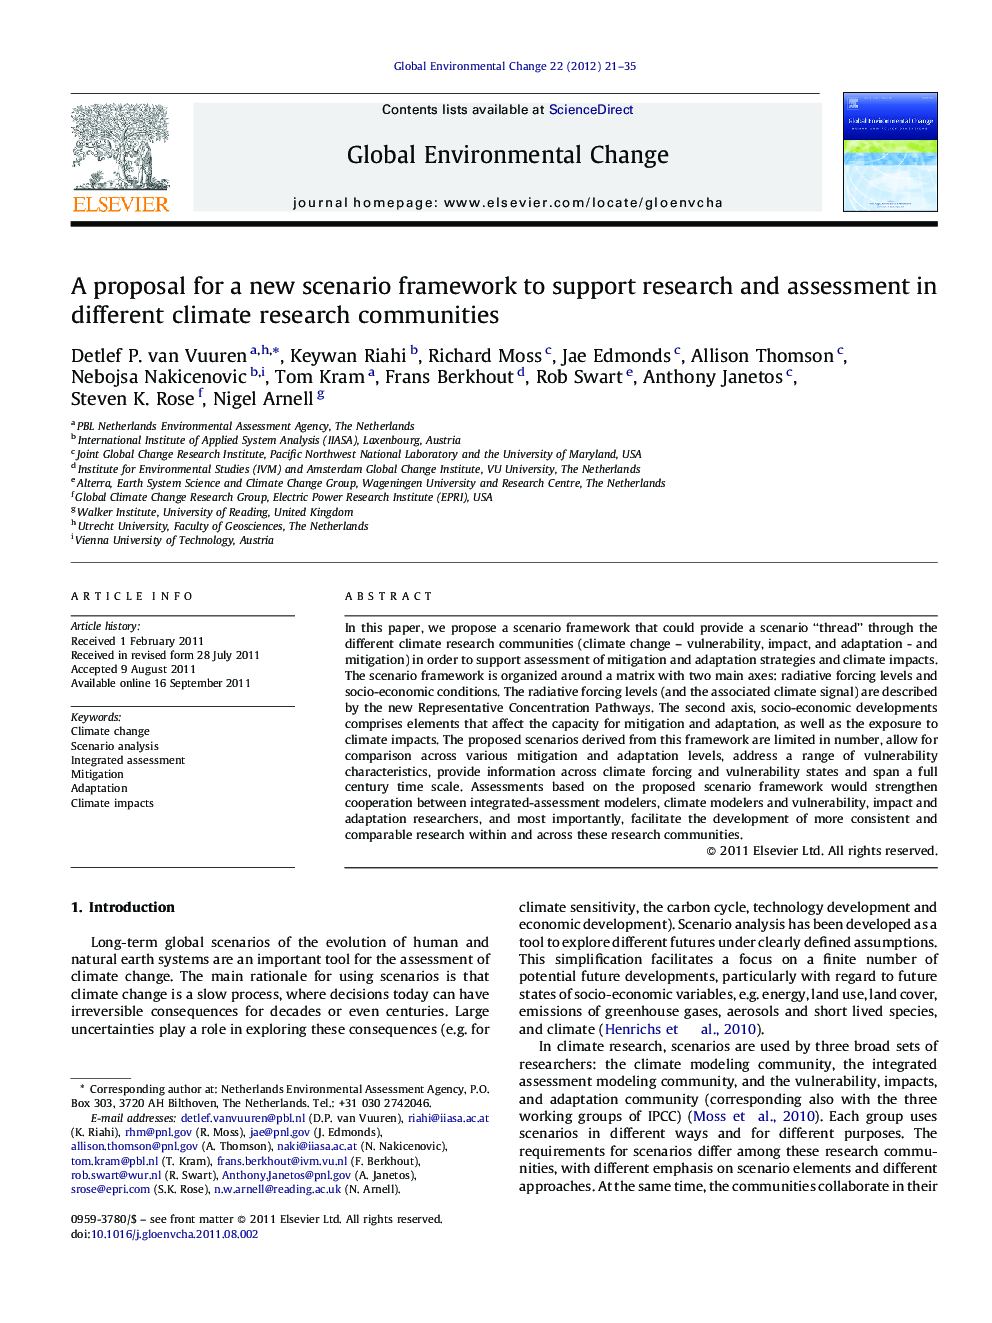 A proposal for a new scenario framework to support research and assessment in different climate research communities